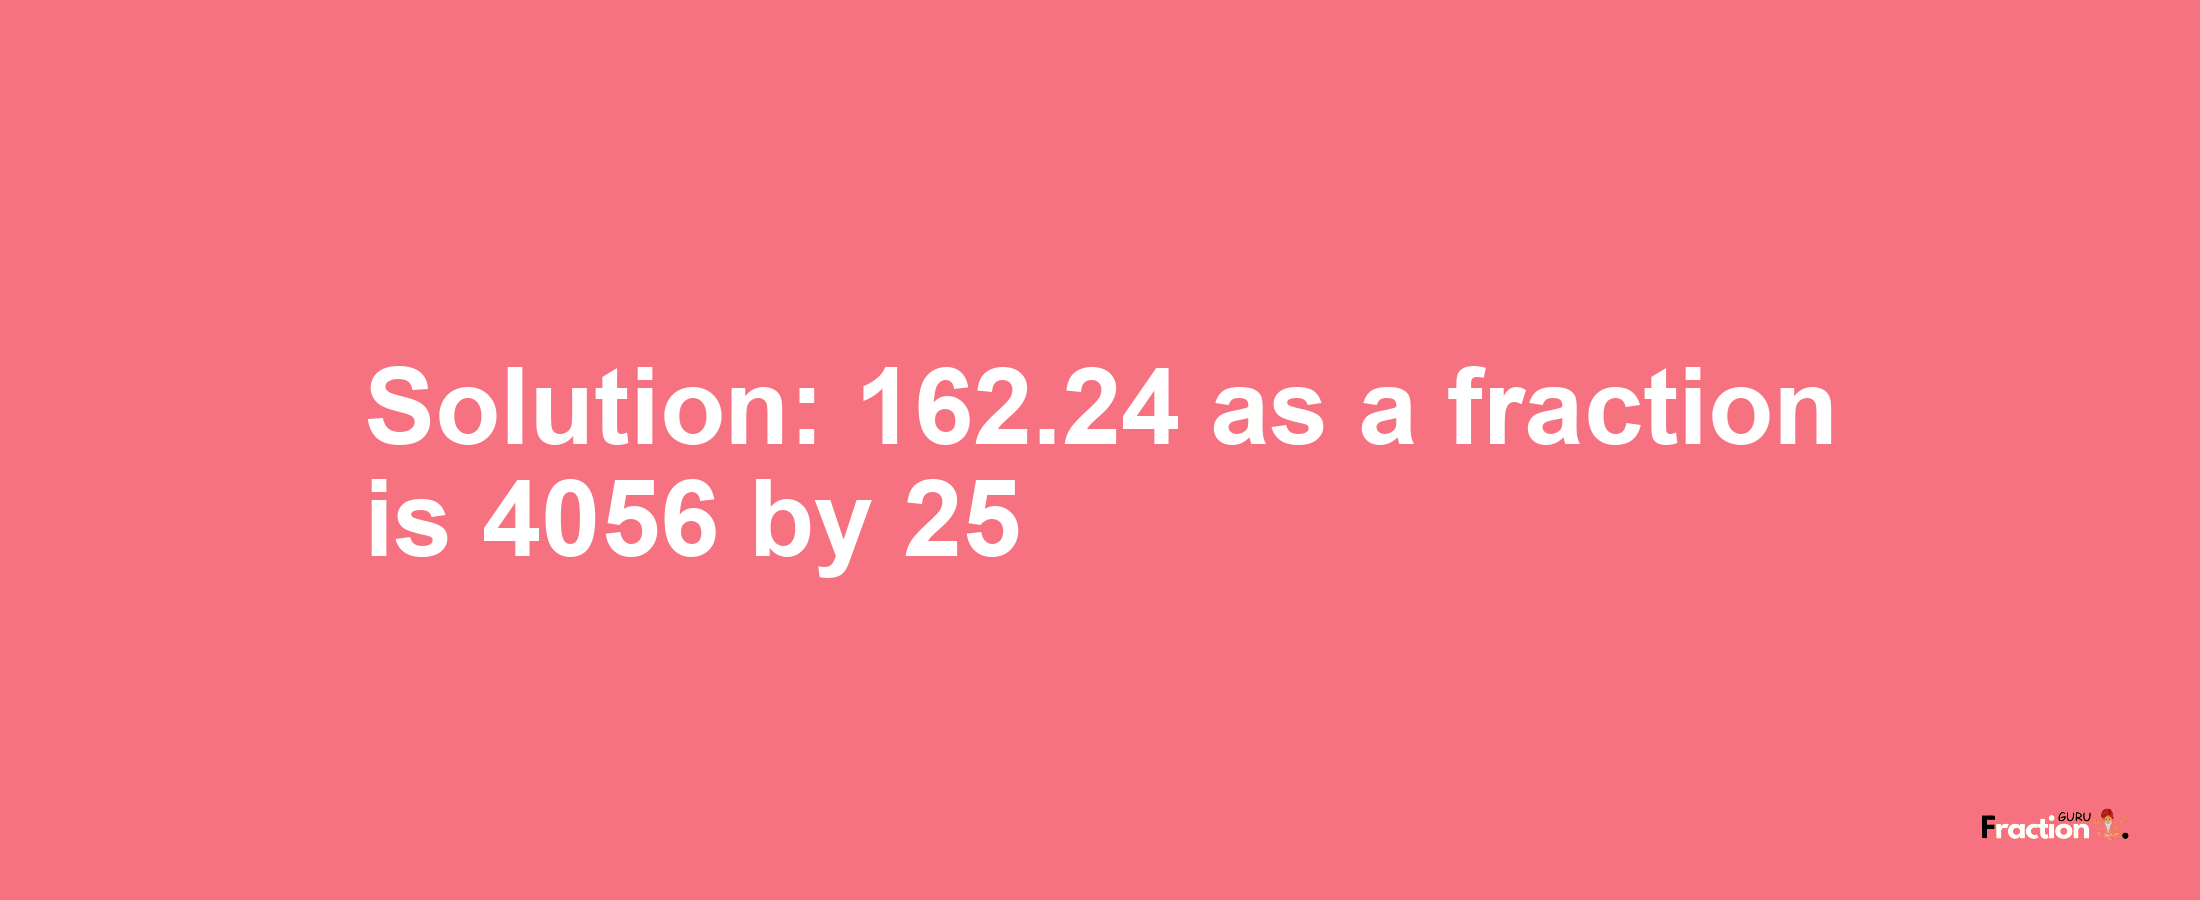 Solution:162.24 as a fraction is 4056/25